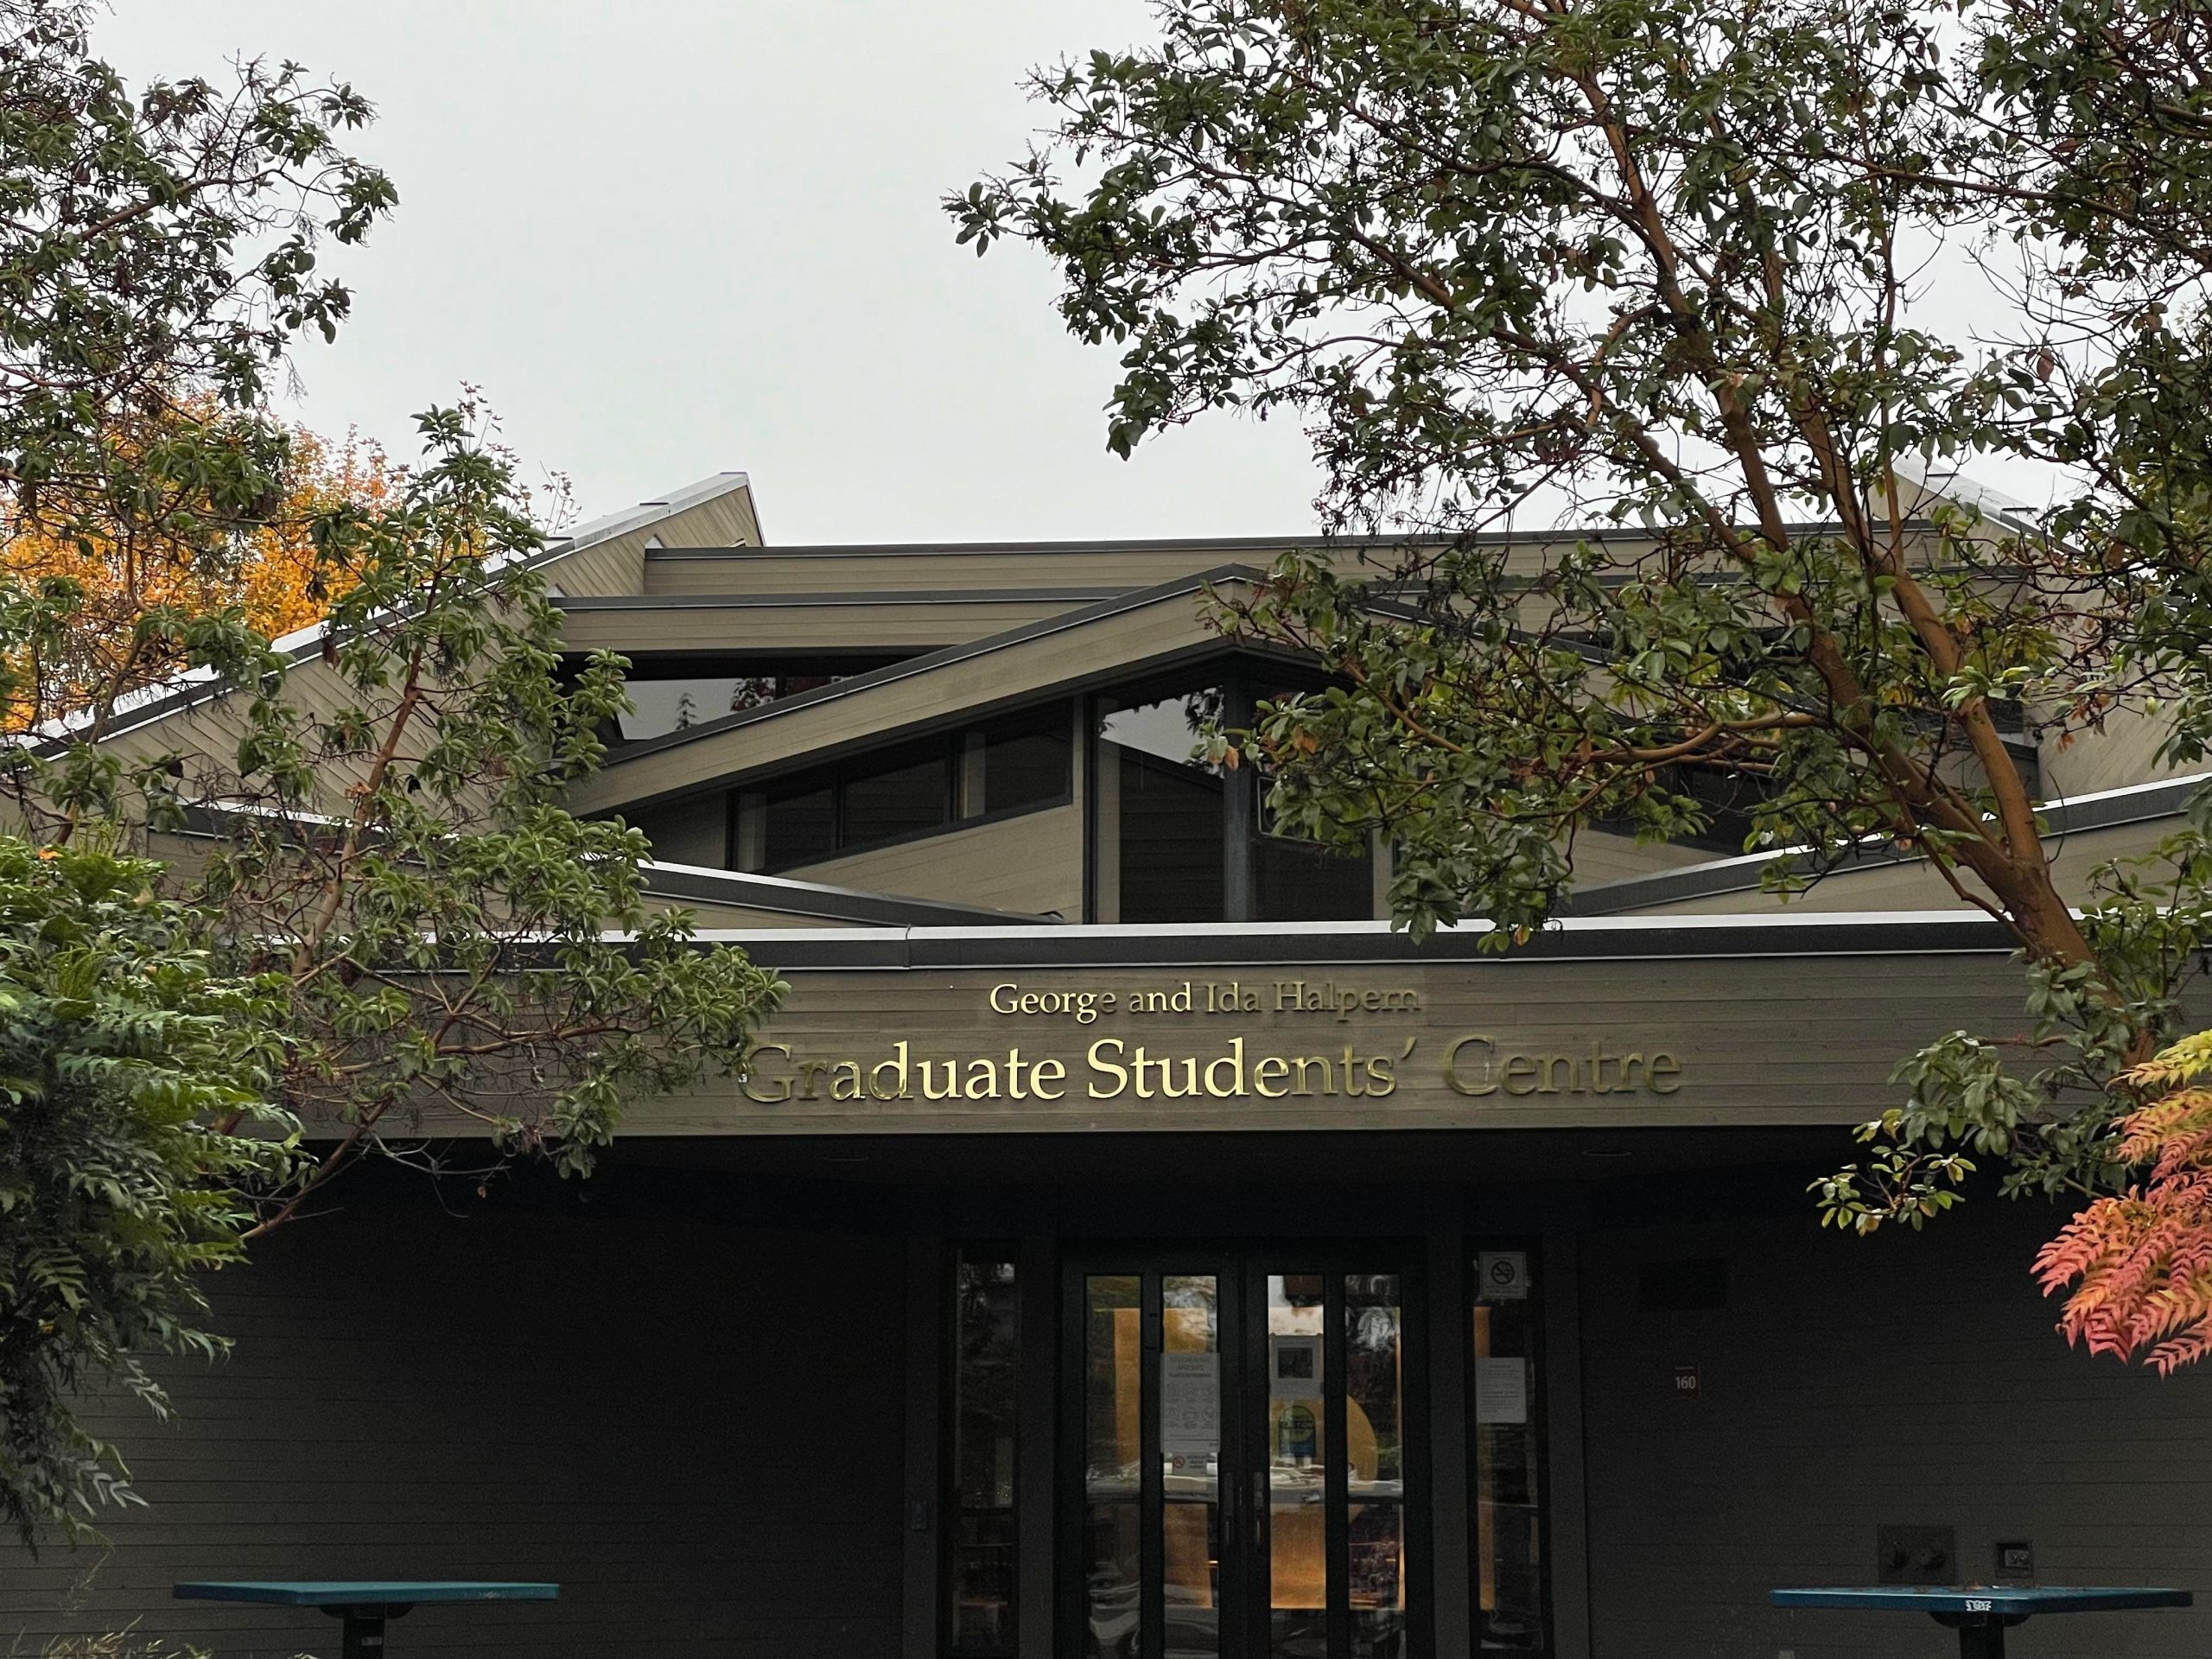 Graduate Students' Centre, photo by Karley Sider.